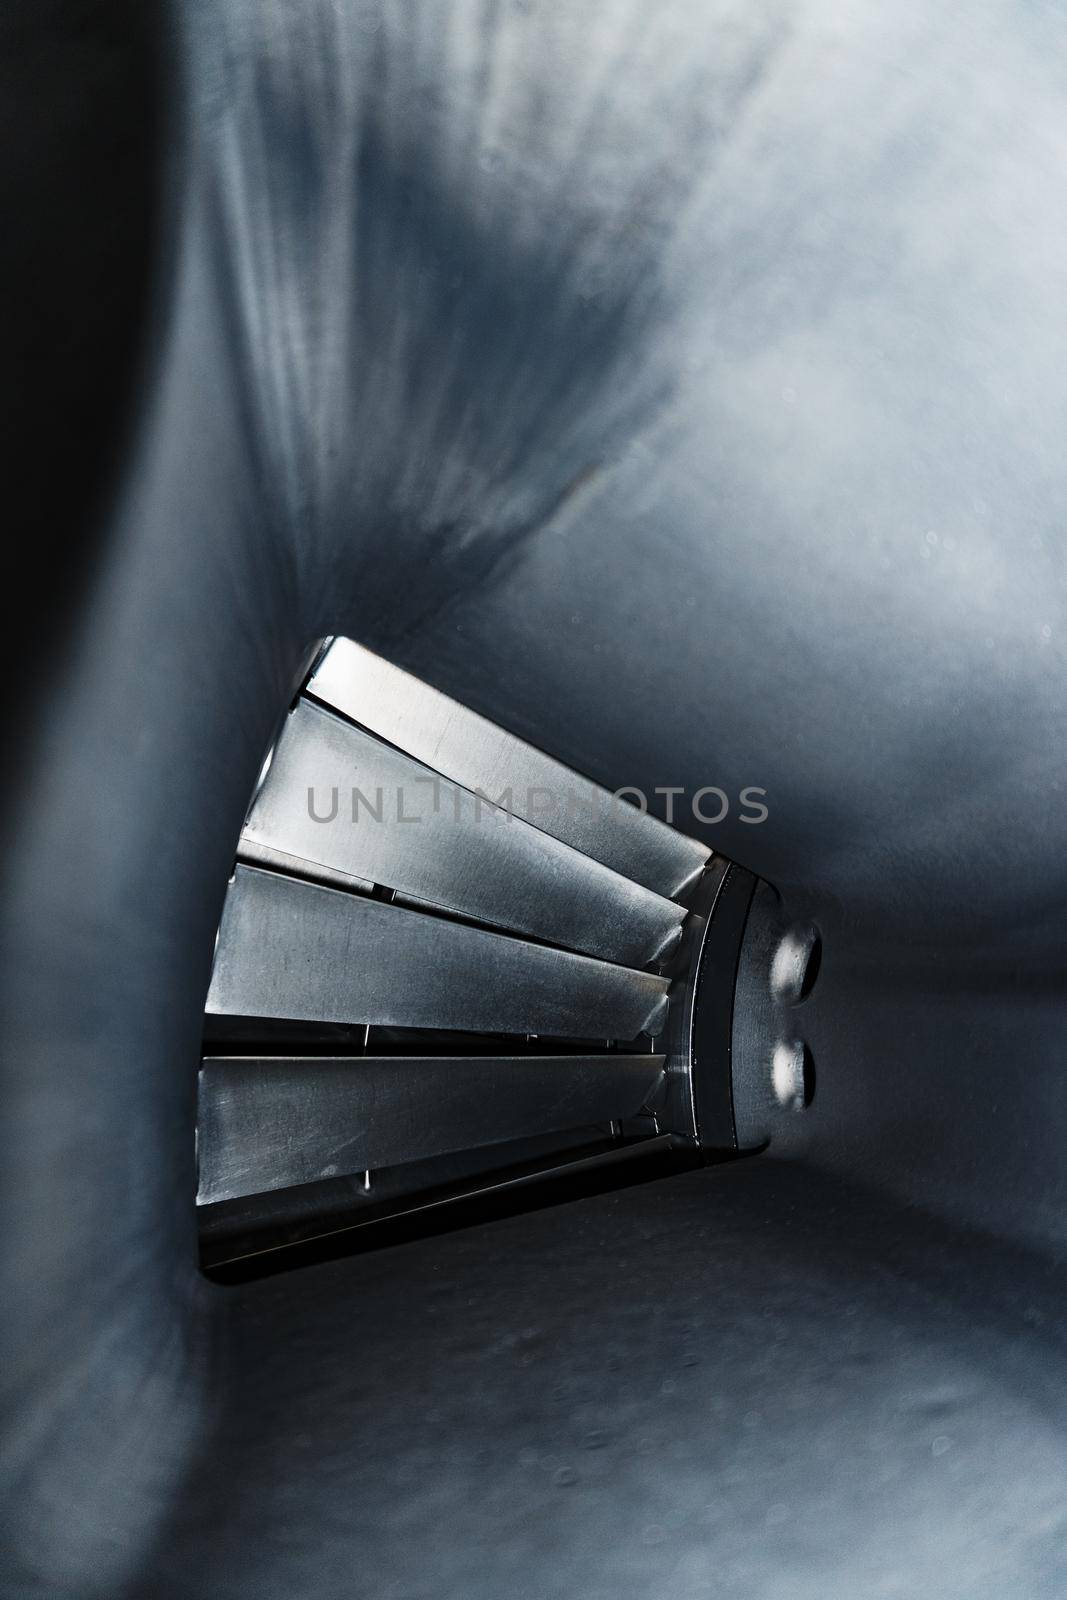 Jet engine fan blades from the inside. by AlexGrec